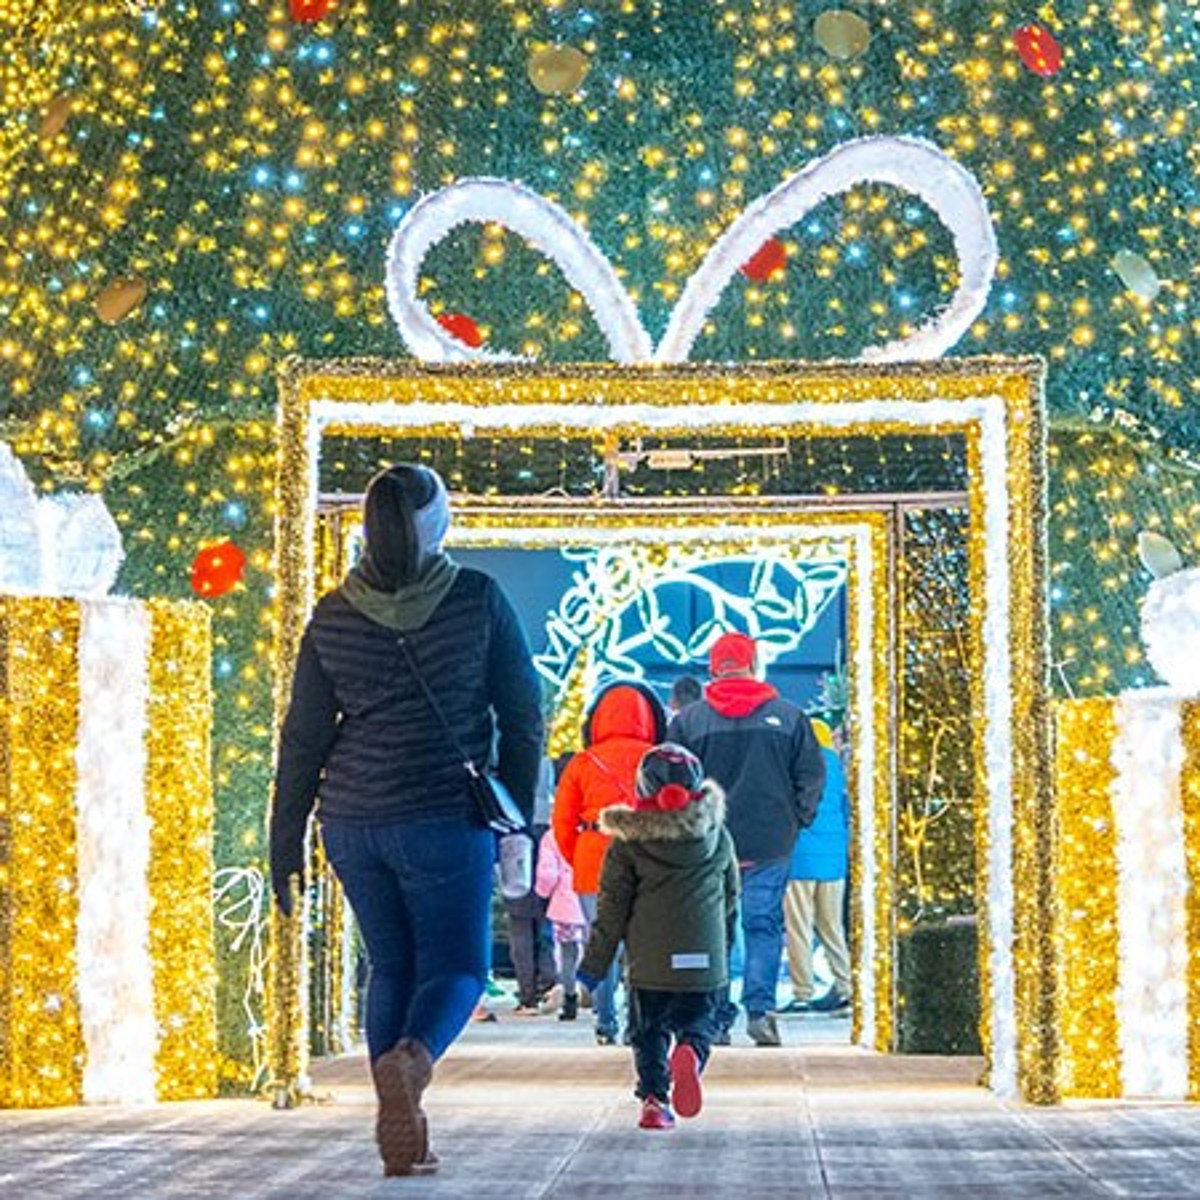 Illinois New Light Festival will amaze all your holiday senses Fort